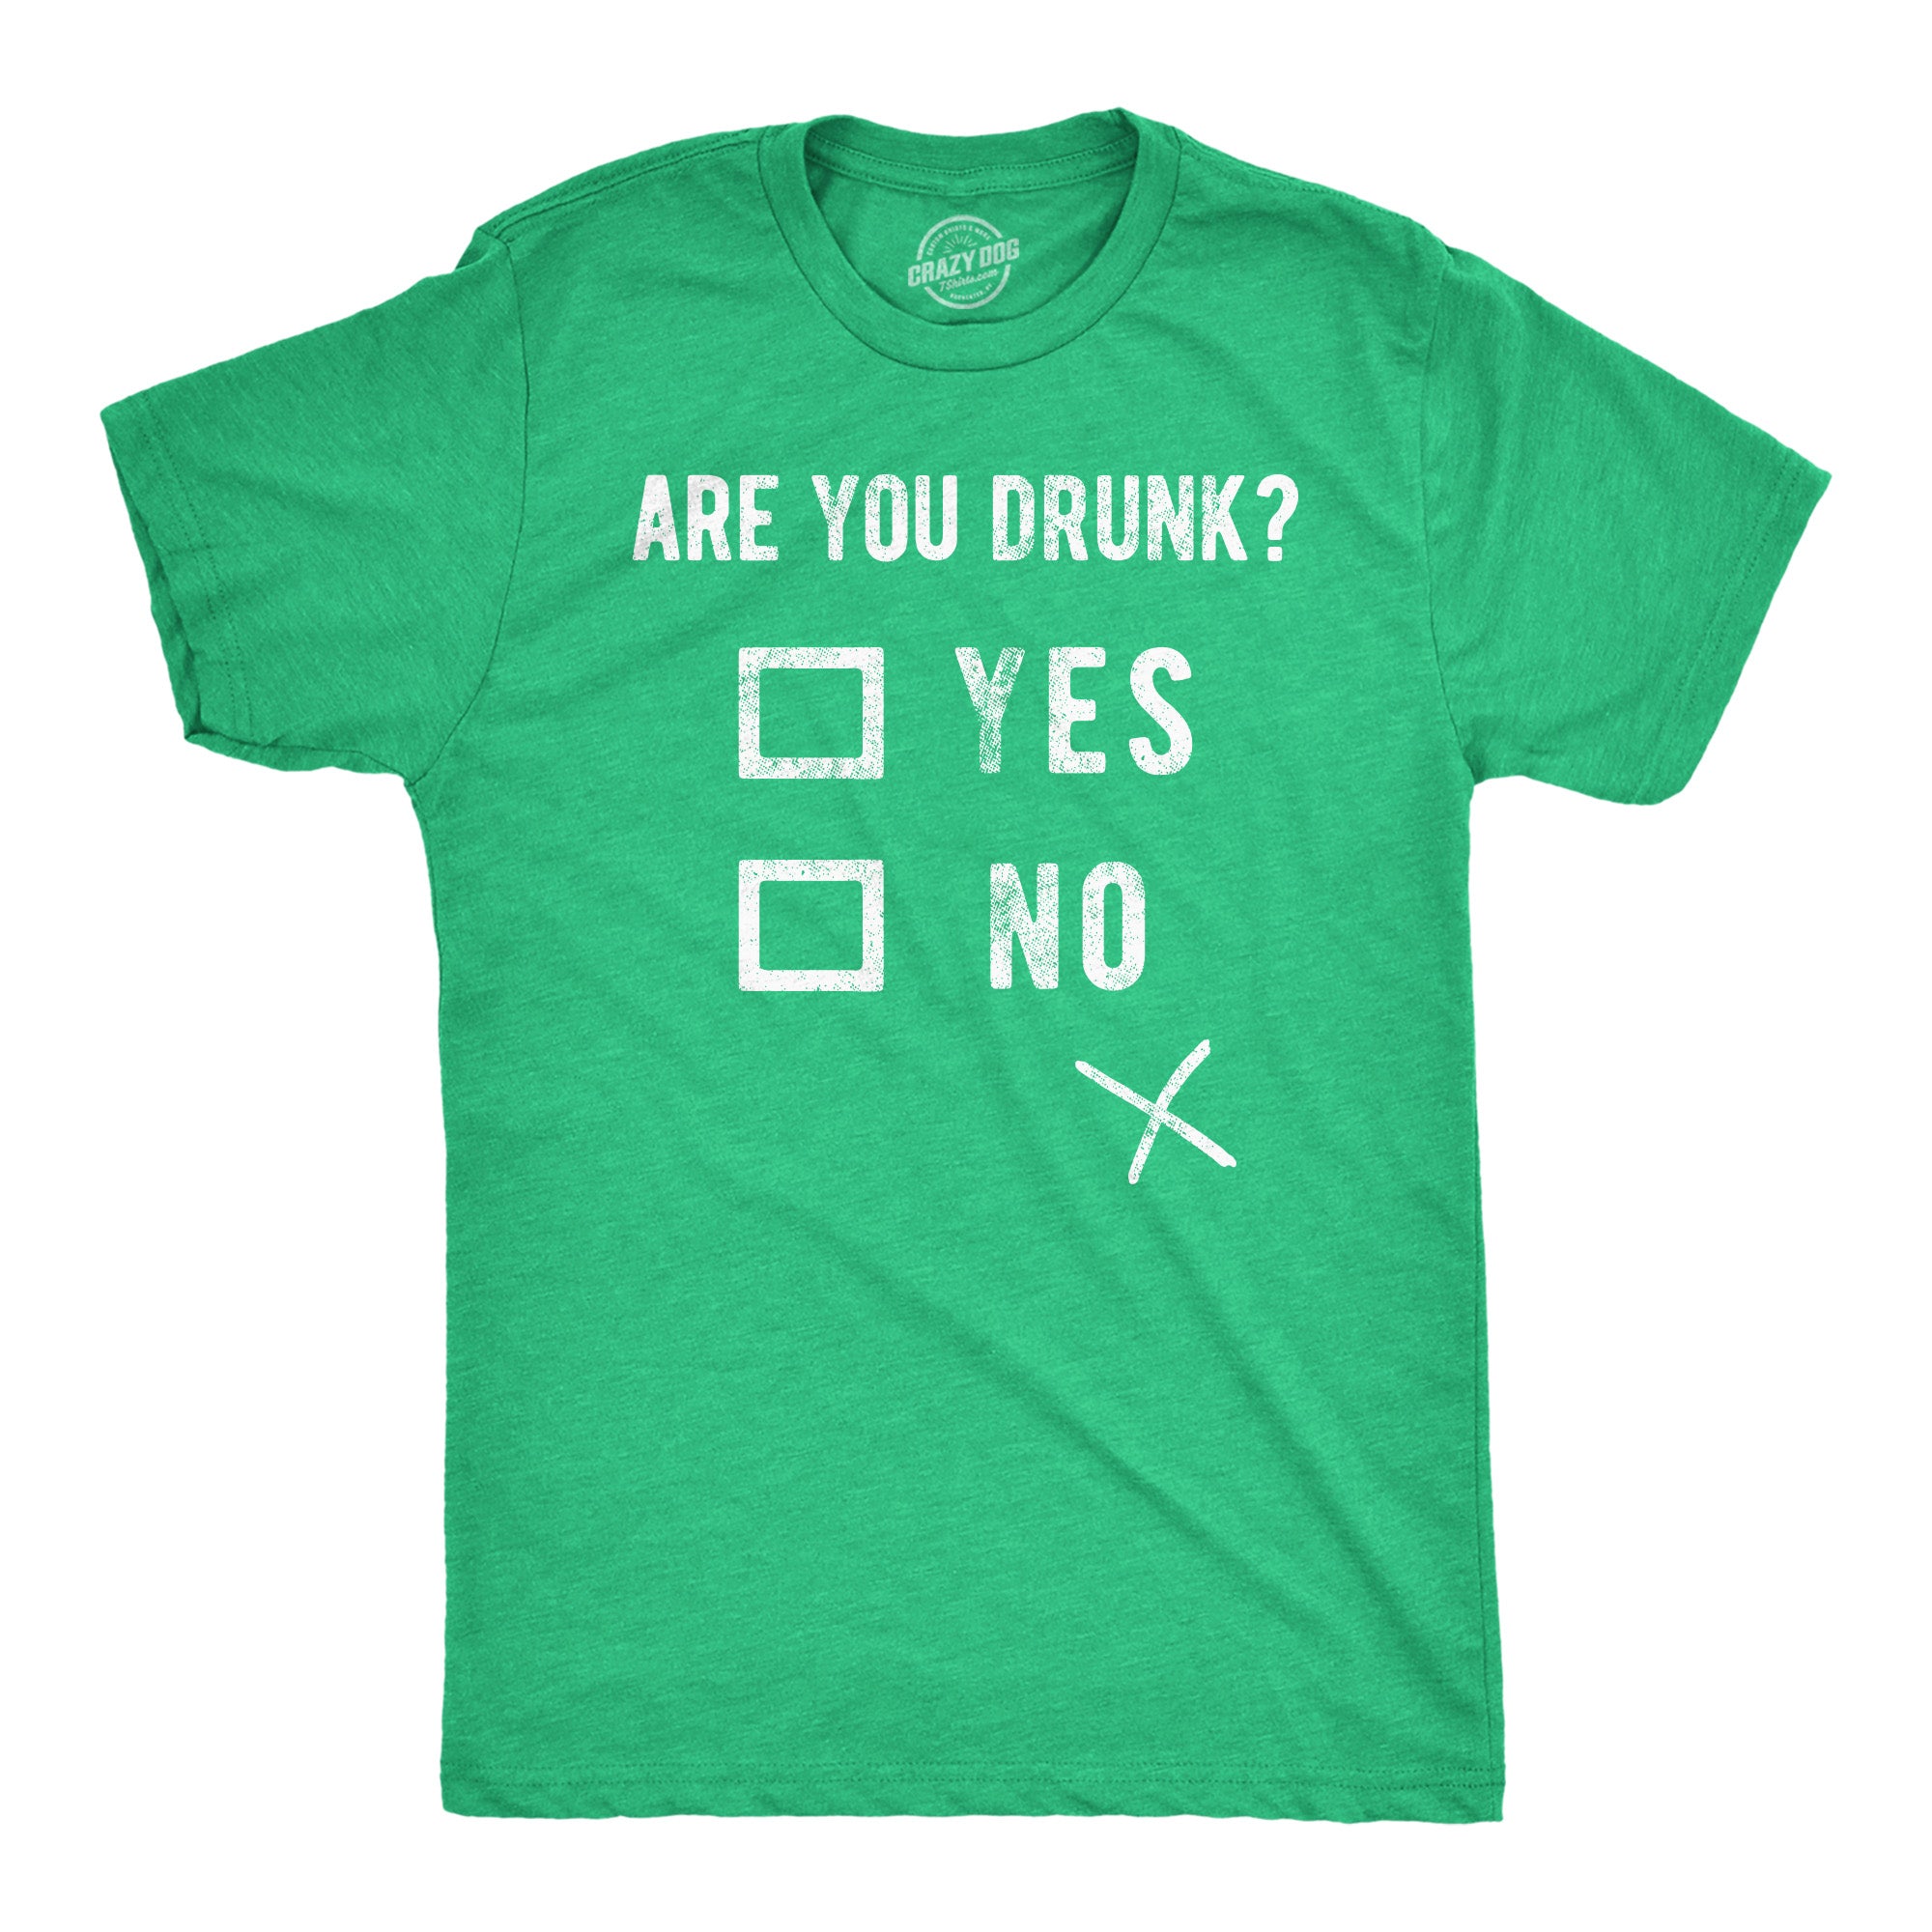 Funny Heather Green - Are You Drunk Are You Drunk Mens T Shirt Nerdy Saint Patrick's Day Drinking Tee